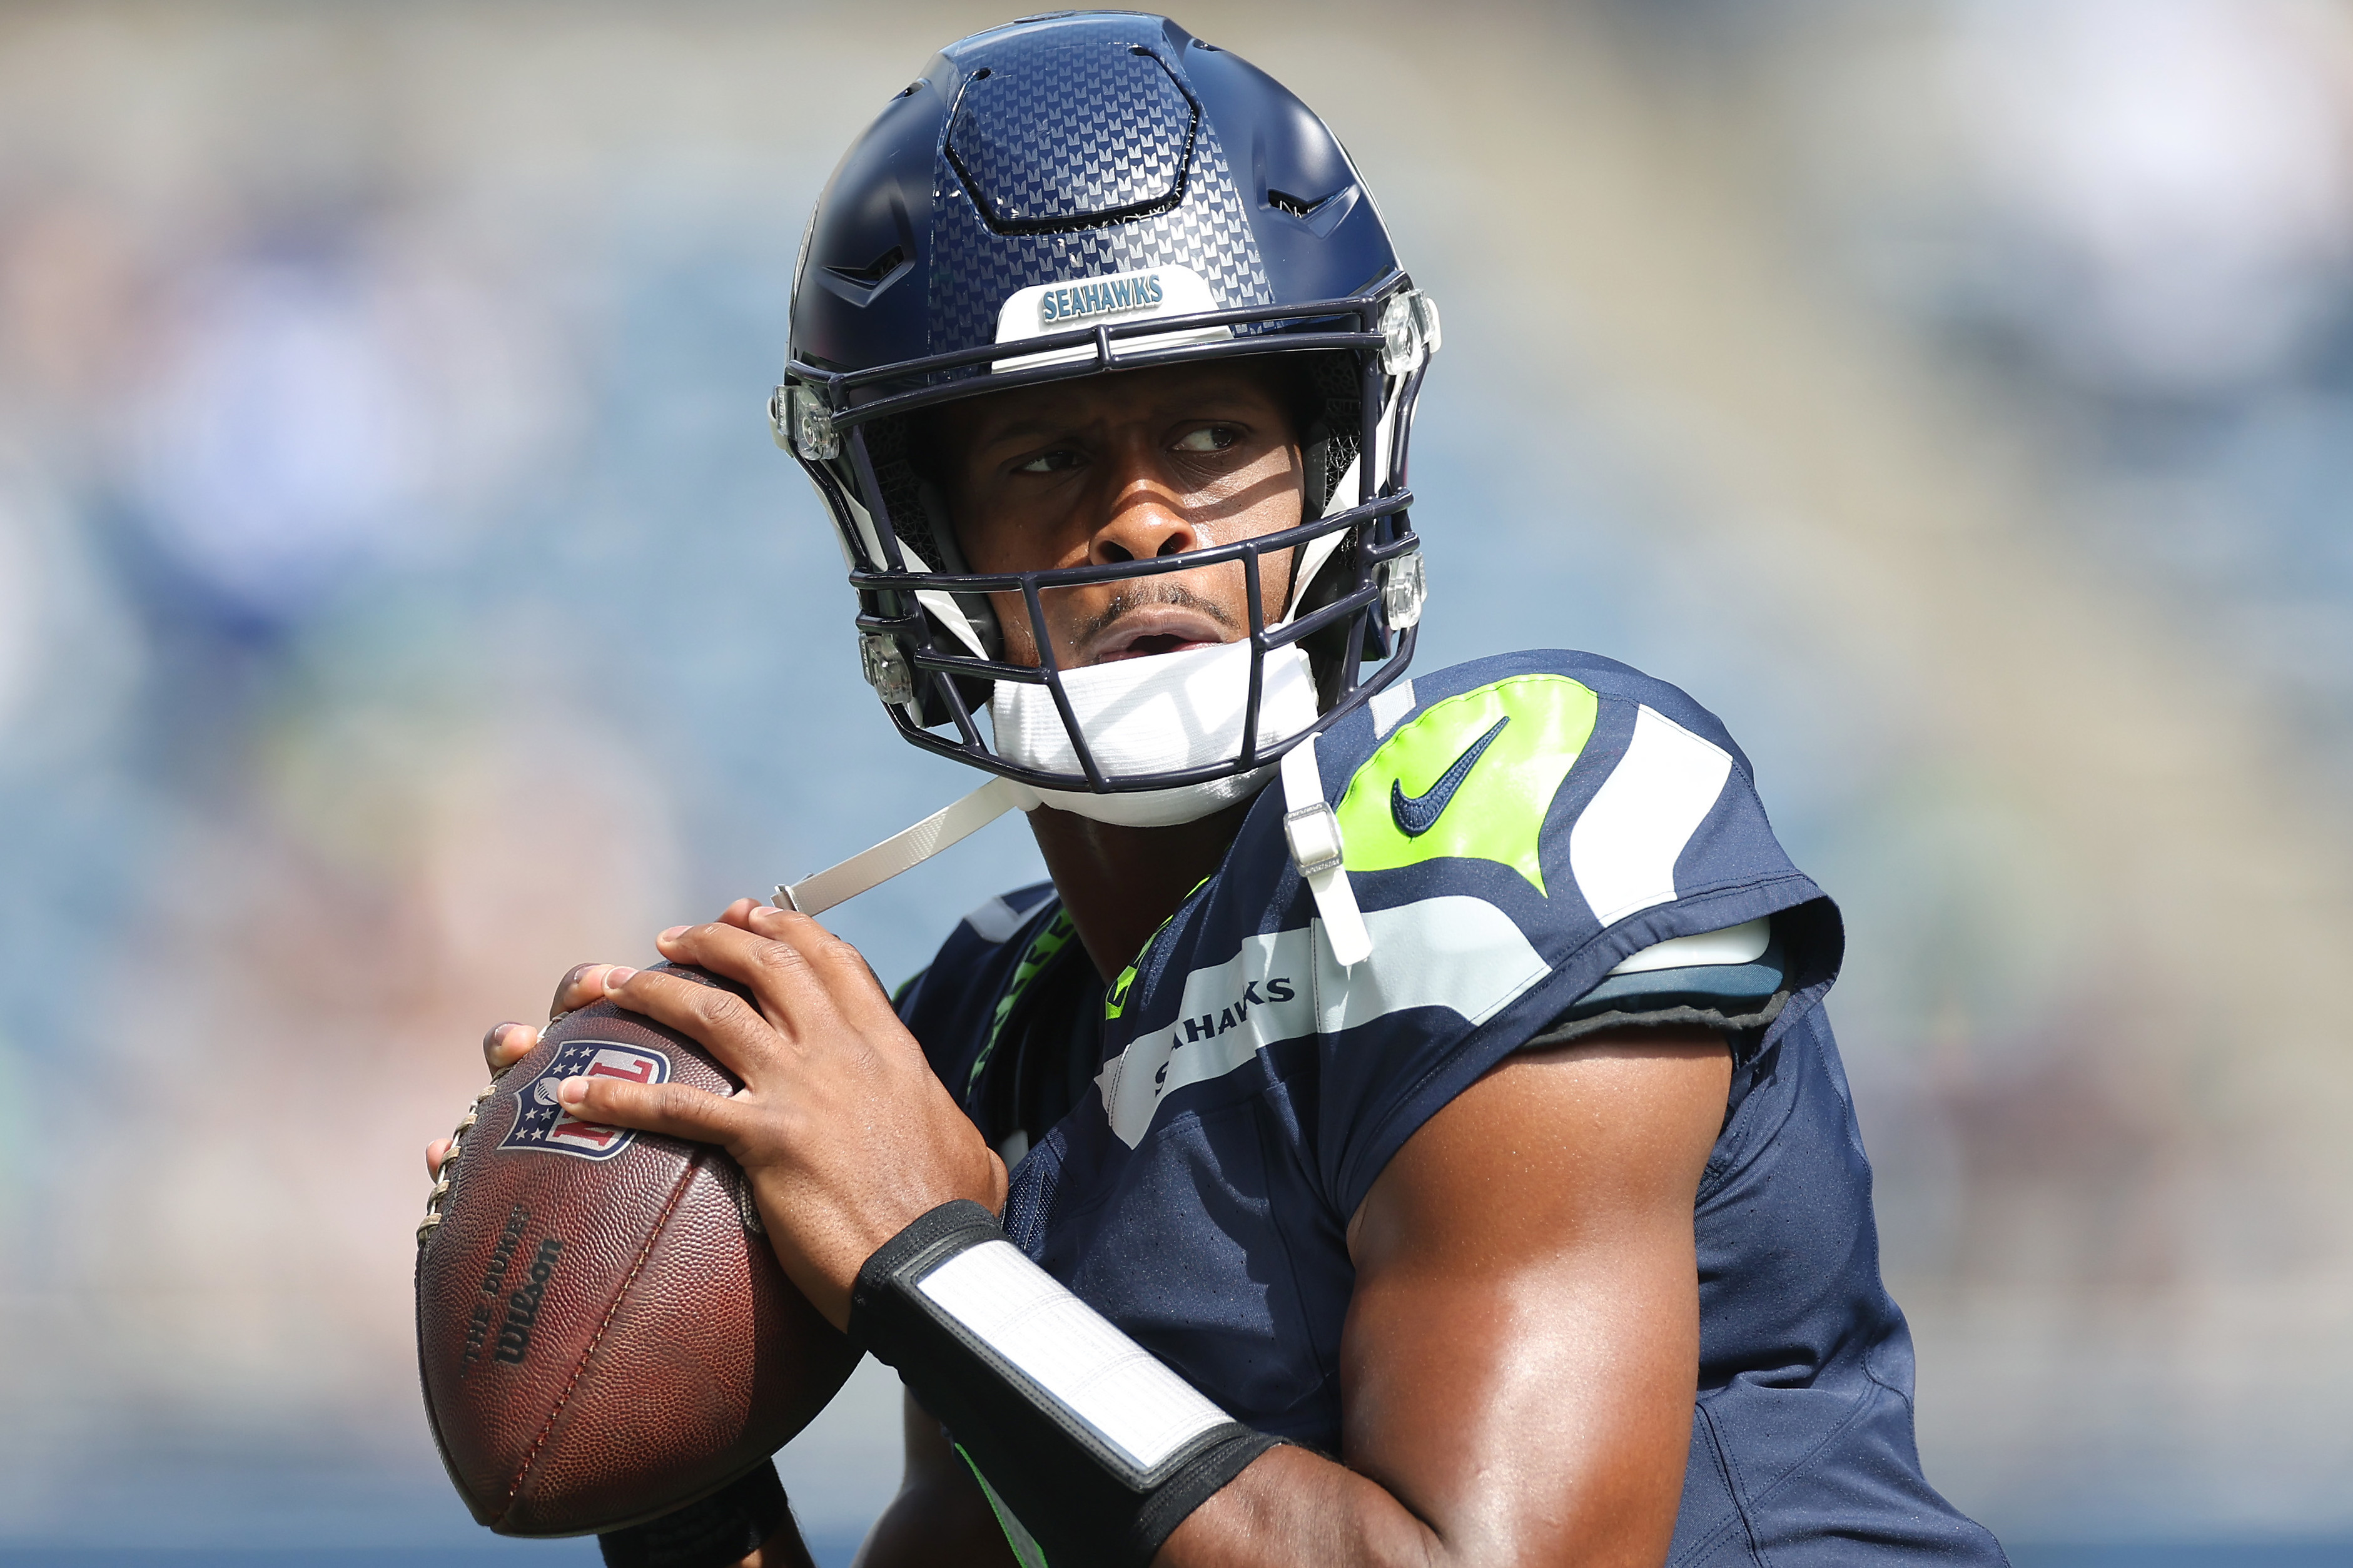 2022 Seattle Seahawks Schedule: Complete schedule, dates, times